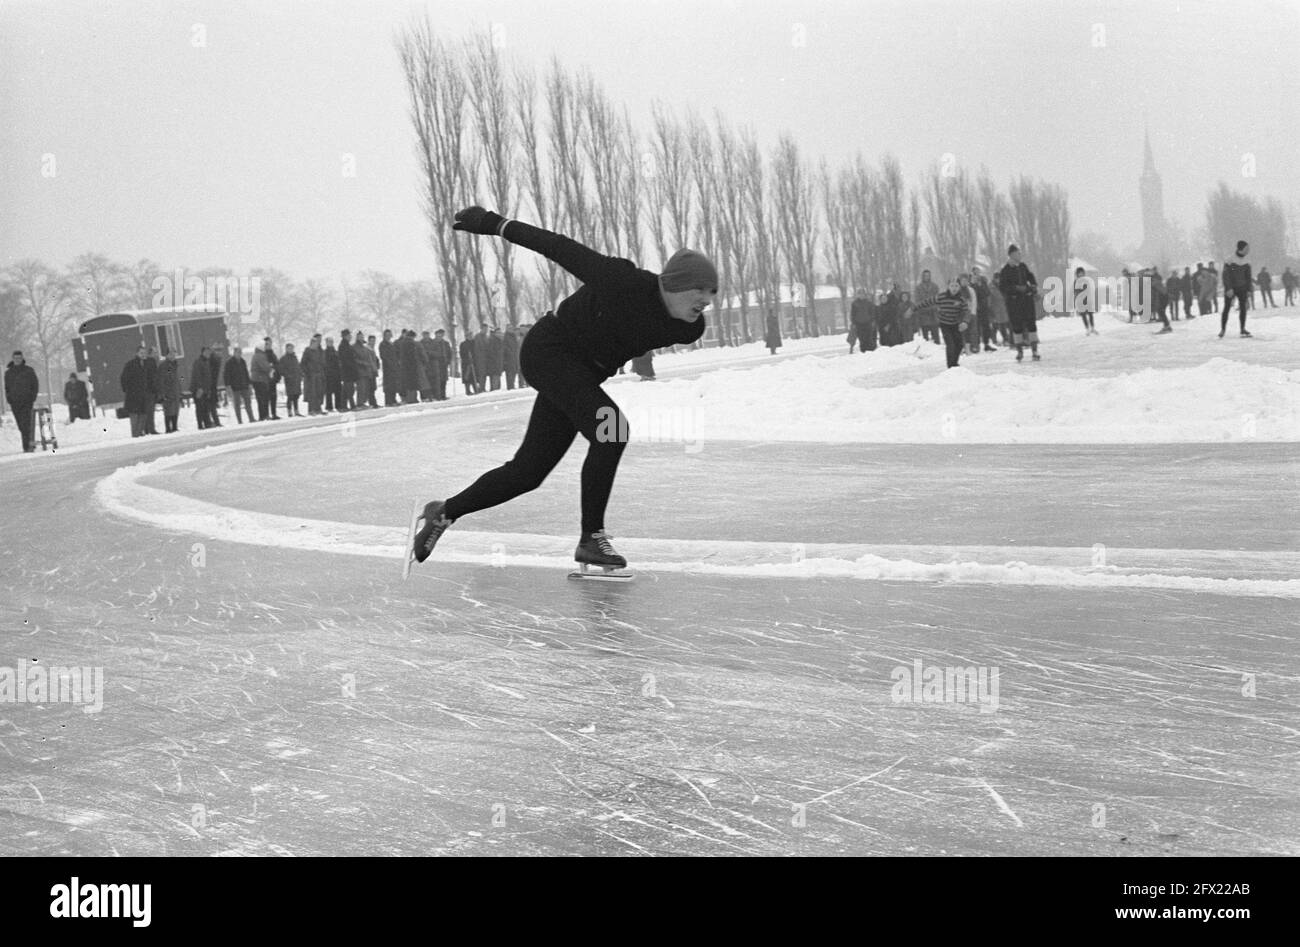 Long distance races in Midden-Beemster, Nico Houter iN aktie, December 28  1962, SCHATSEN, sports, races, The Netherlands, 20th century press agency  photo, news to remember, documentary, historic photography 1945-1990,  visual stories, human